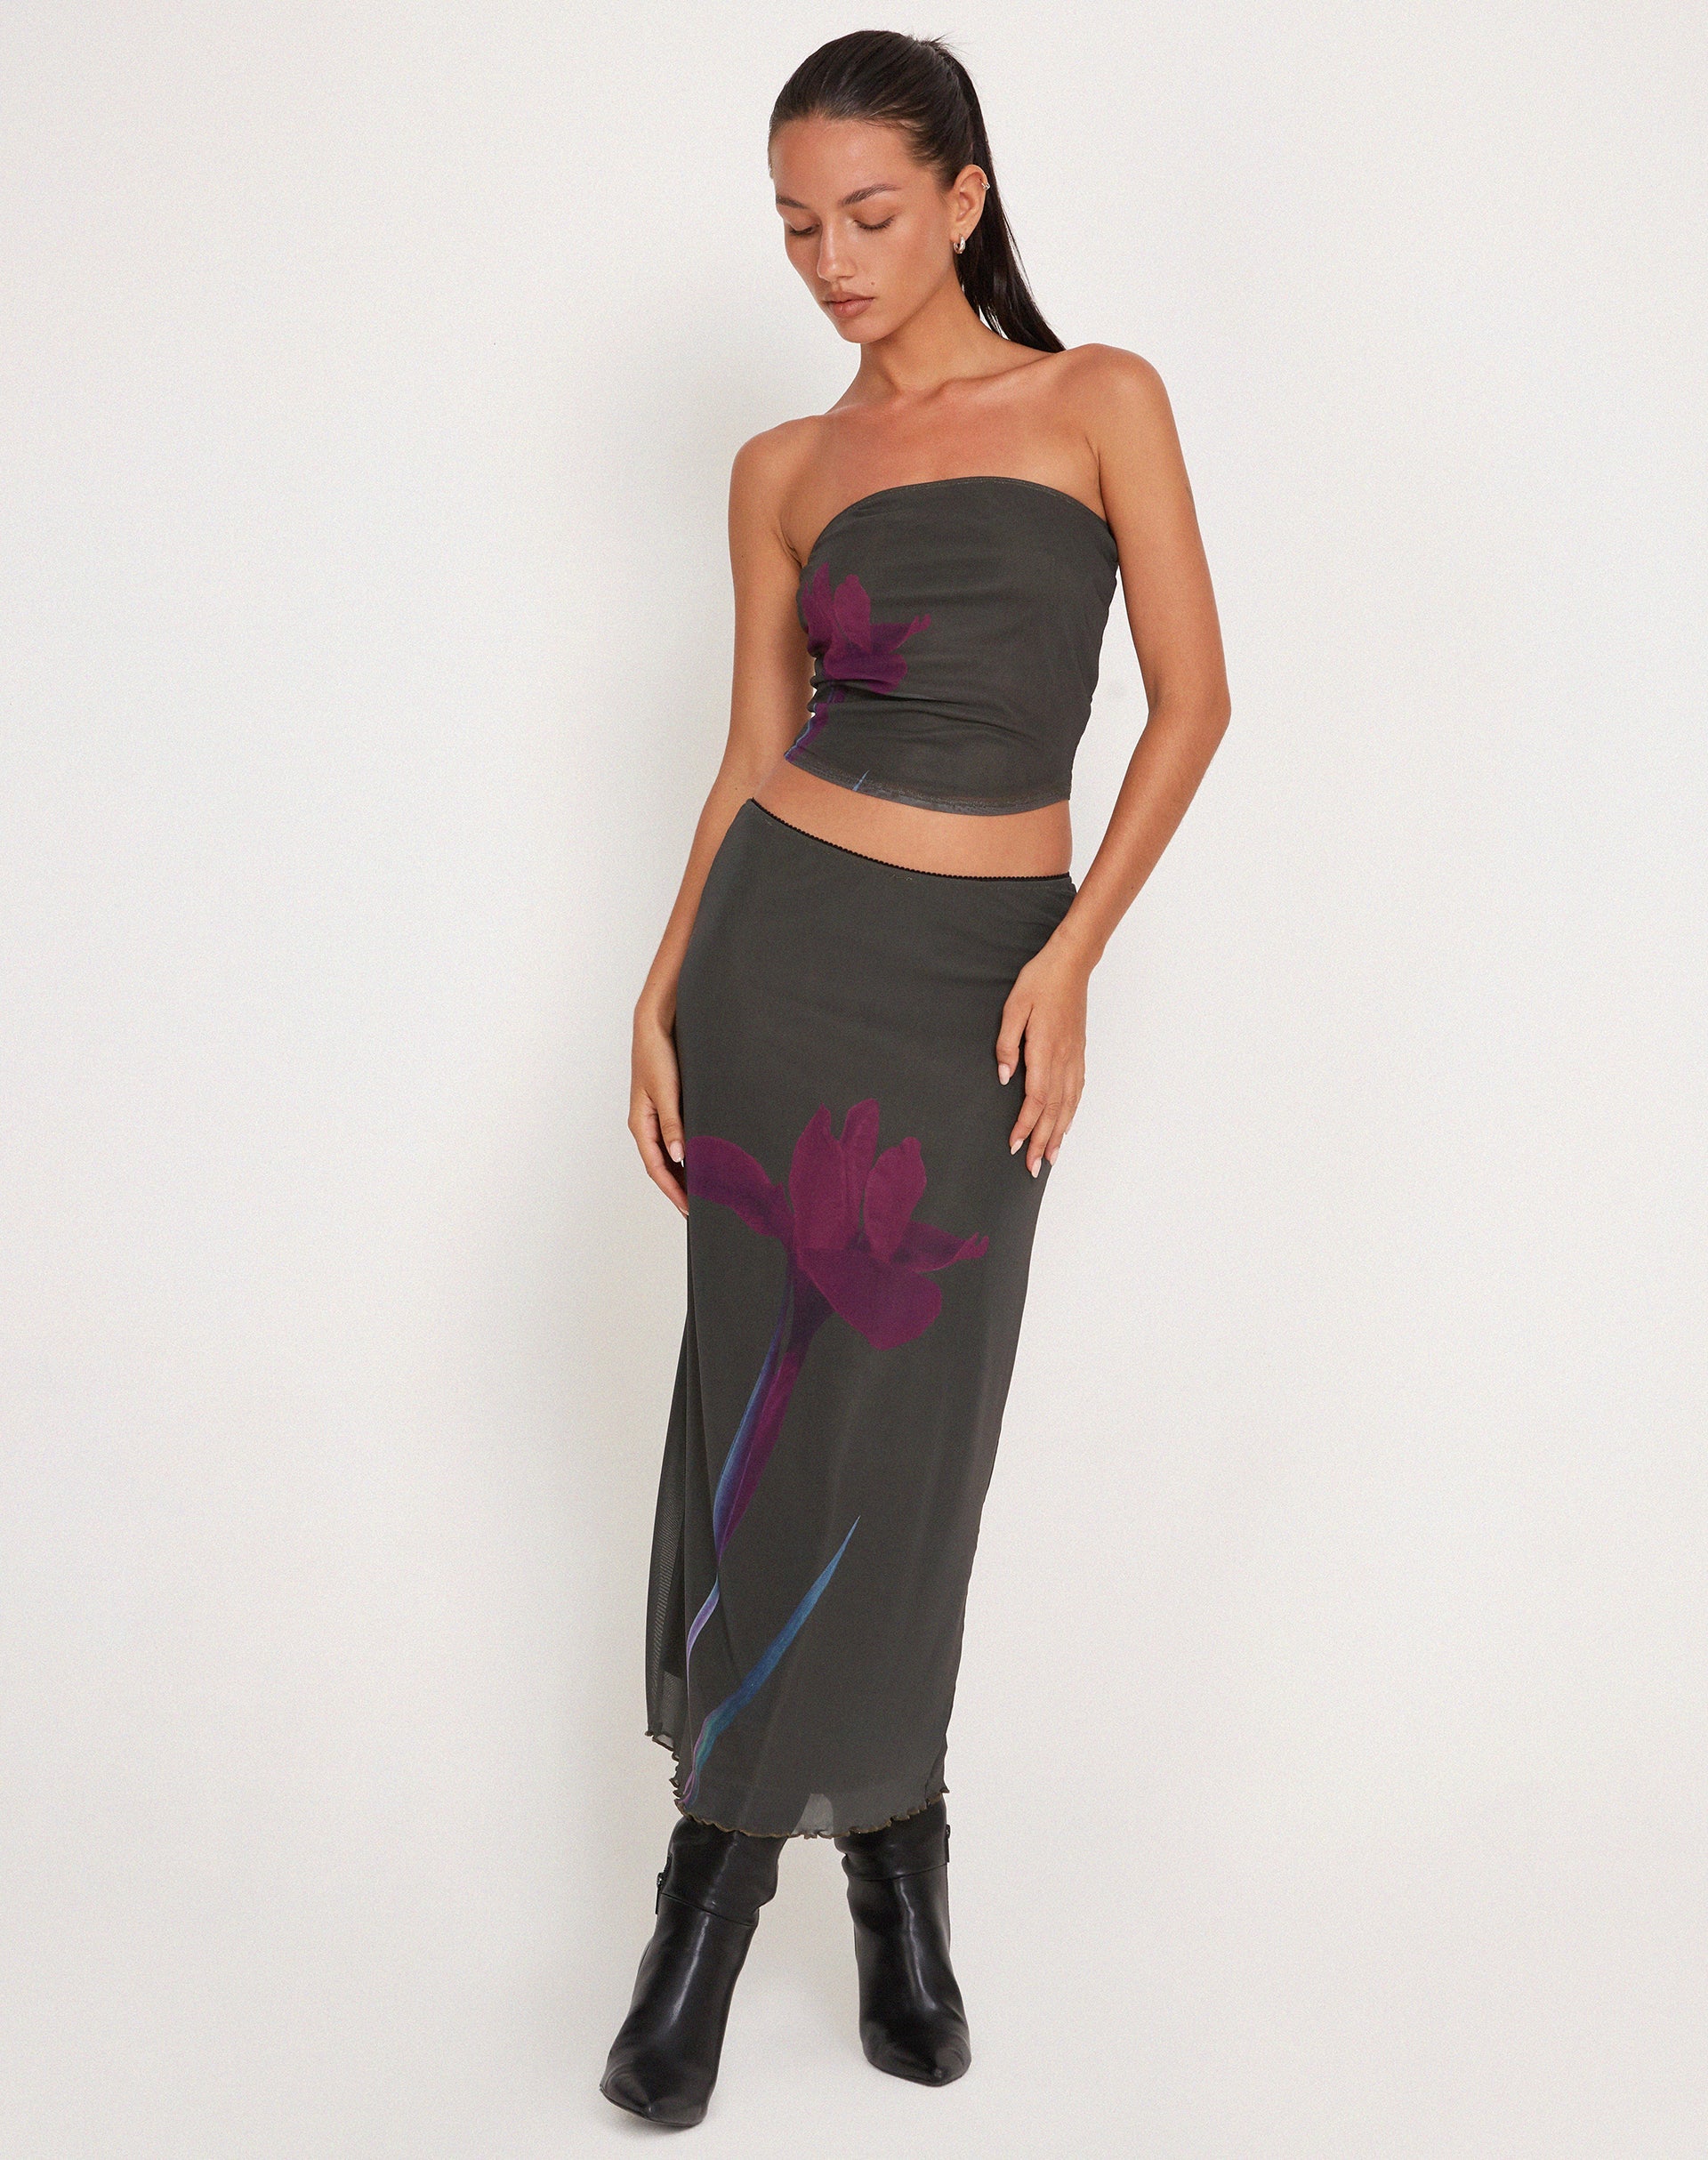 Lassie Maxi Skirt in Green with Purple Flower Print